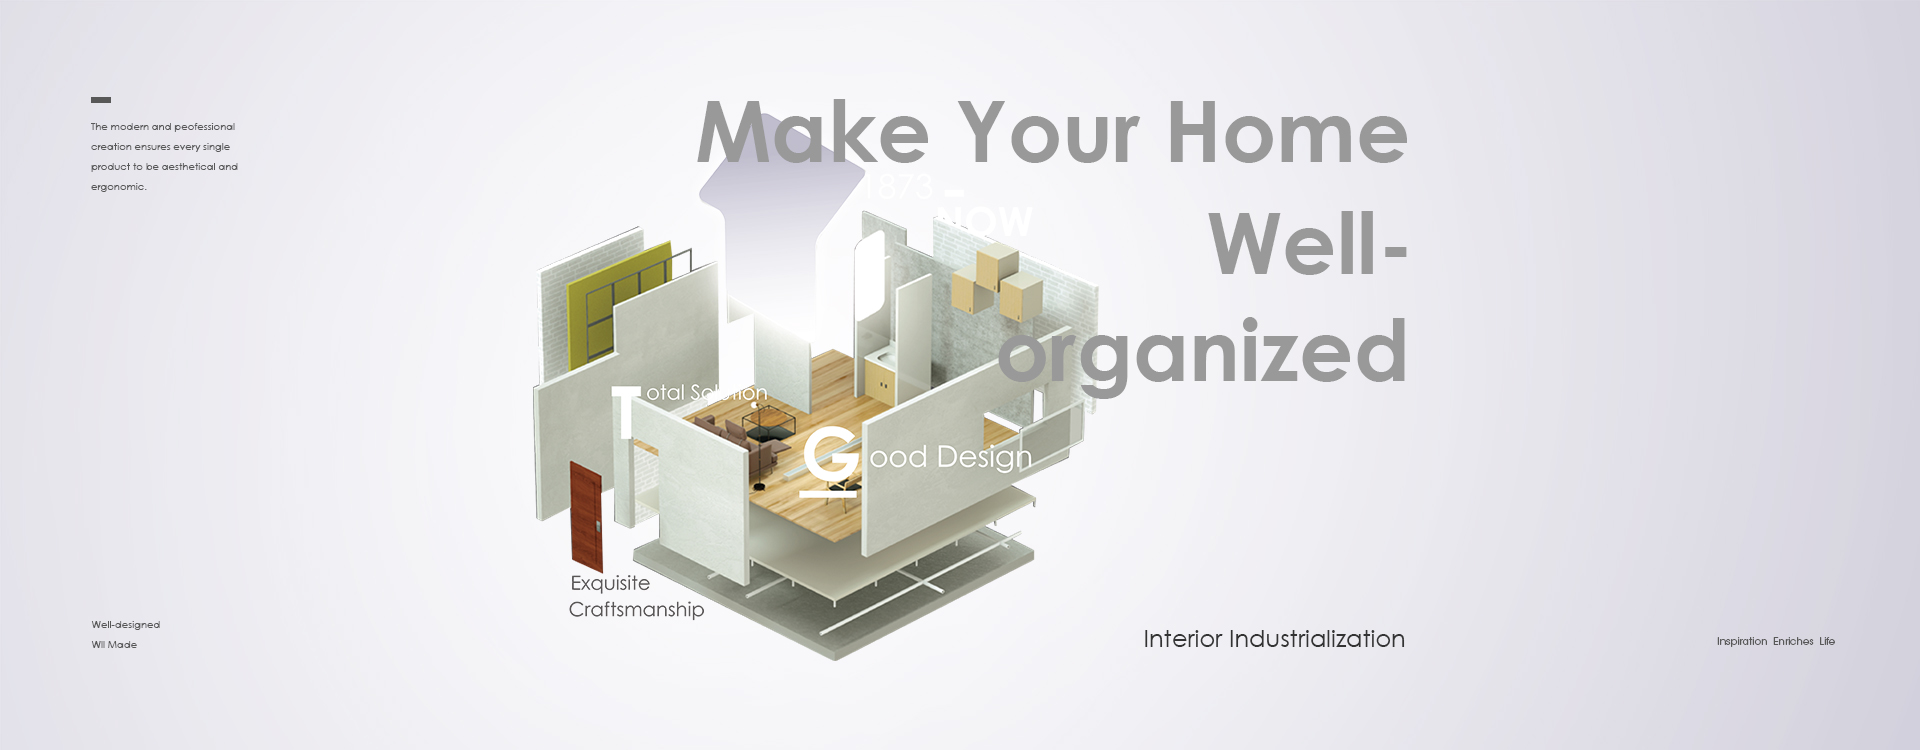 Make Your Home Well-organized